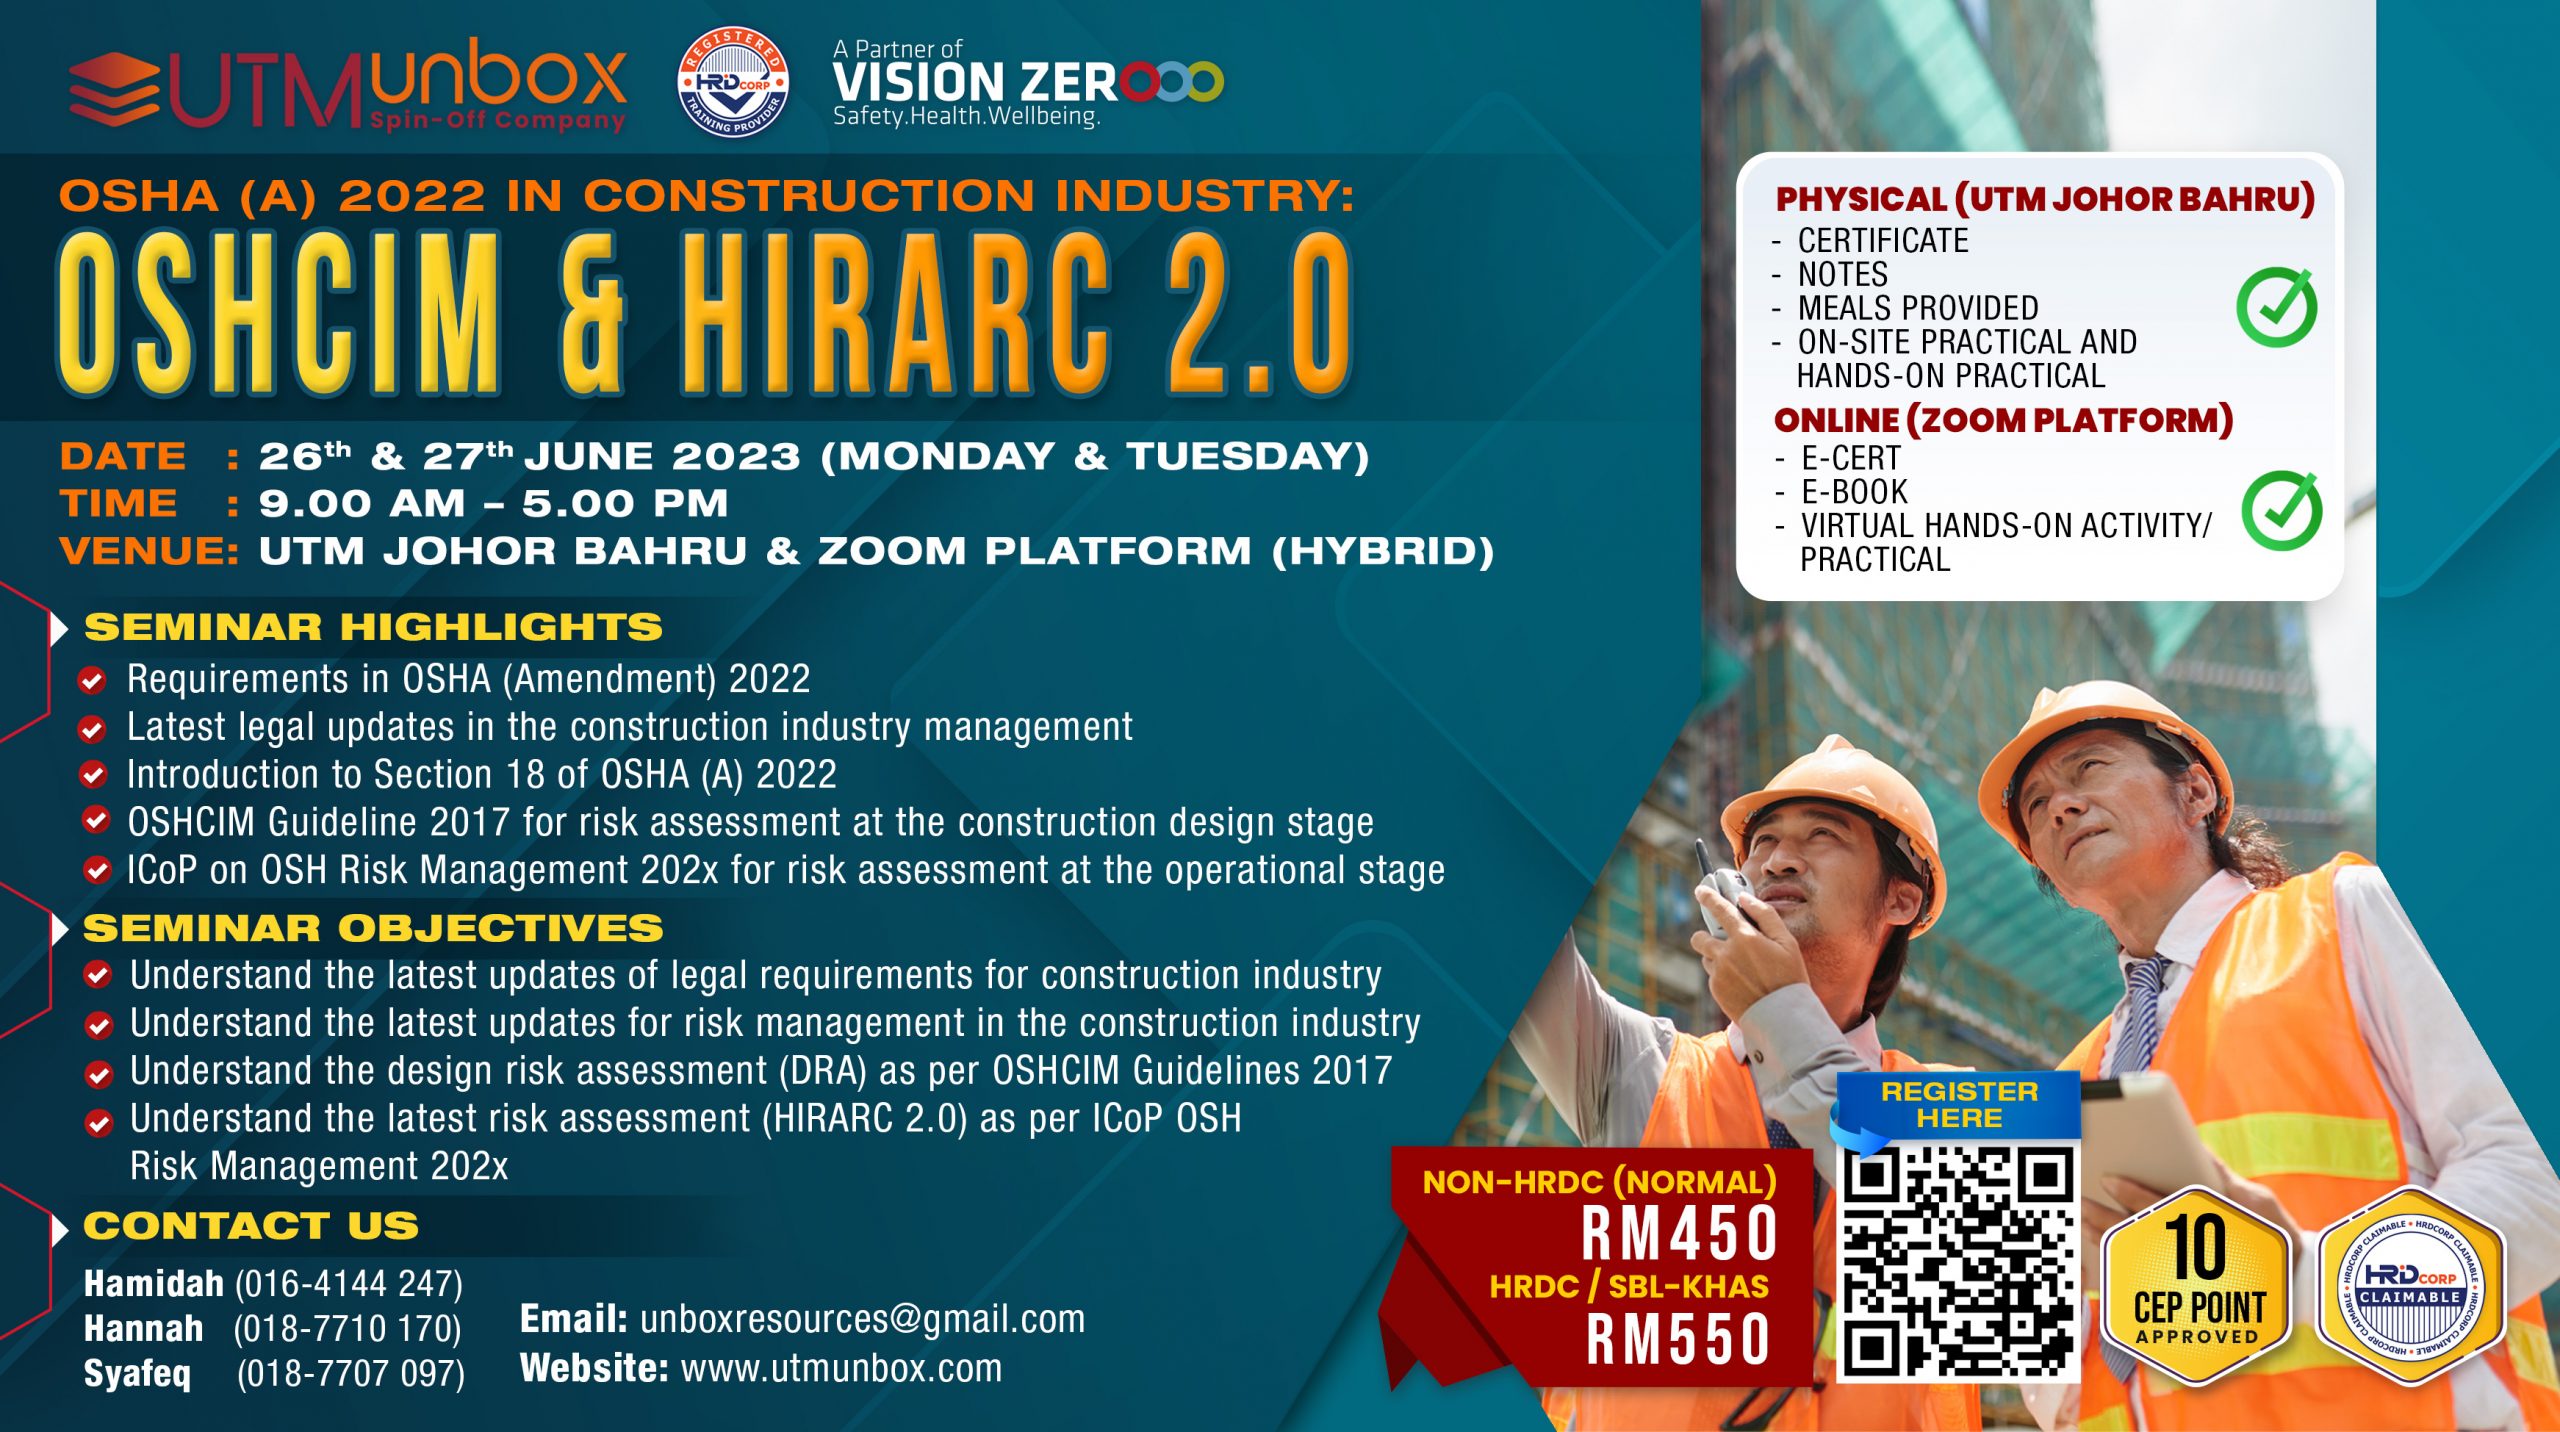 You are currently viewing OSHA (A) 2022 IN CONSTRUCTION INDUSTRY: OSHCIM & HIRARC 2.0